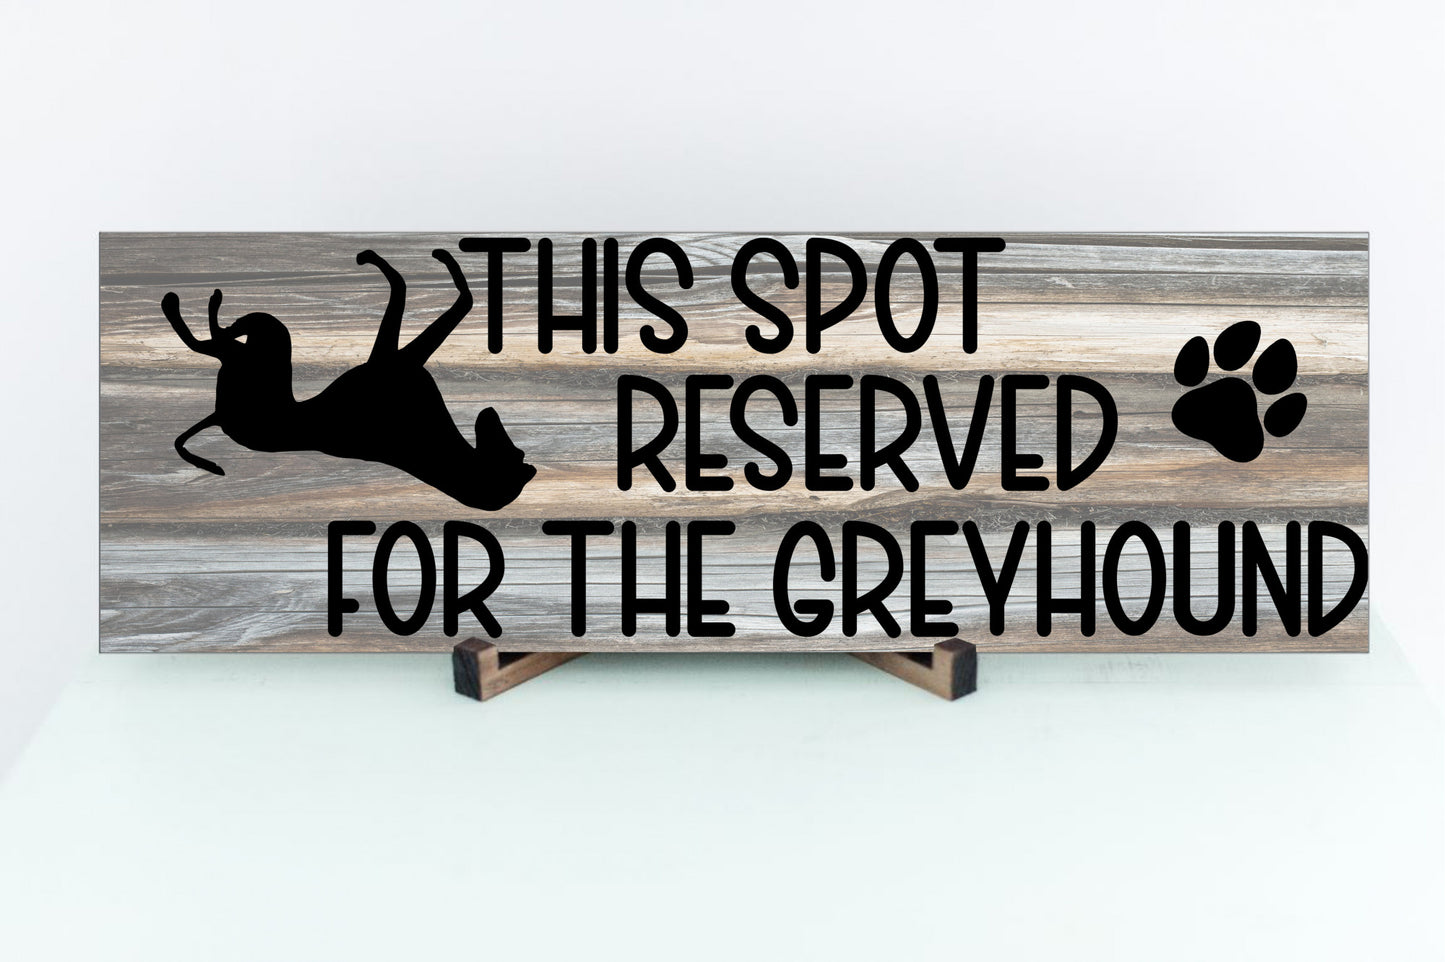 This spot reserved for the Greyhound